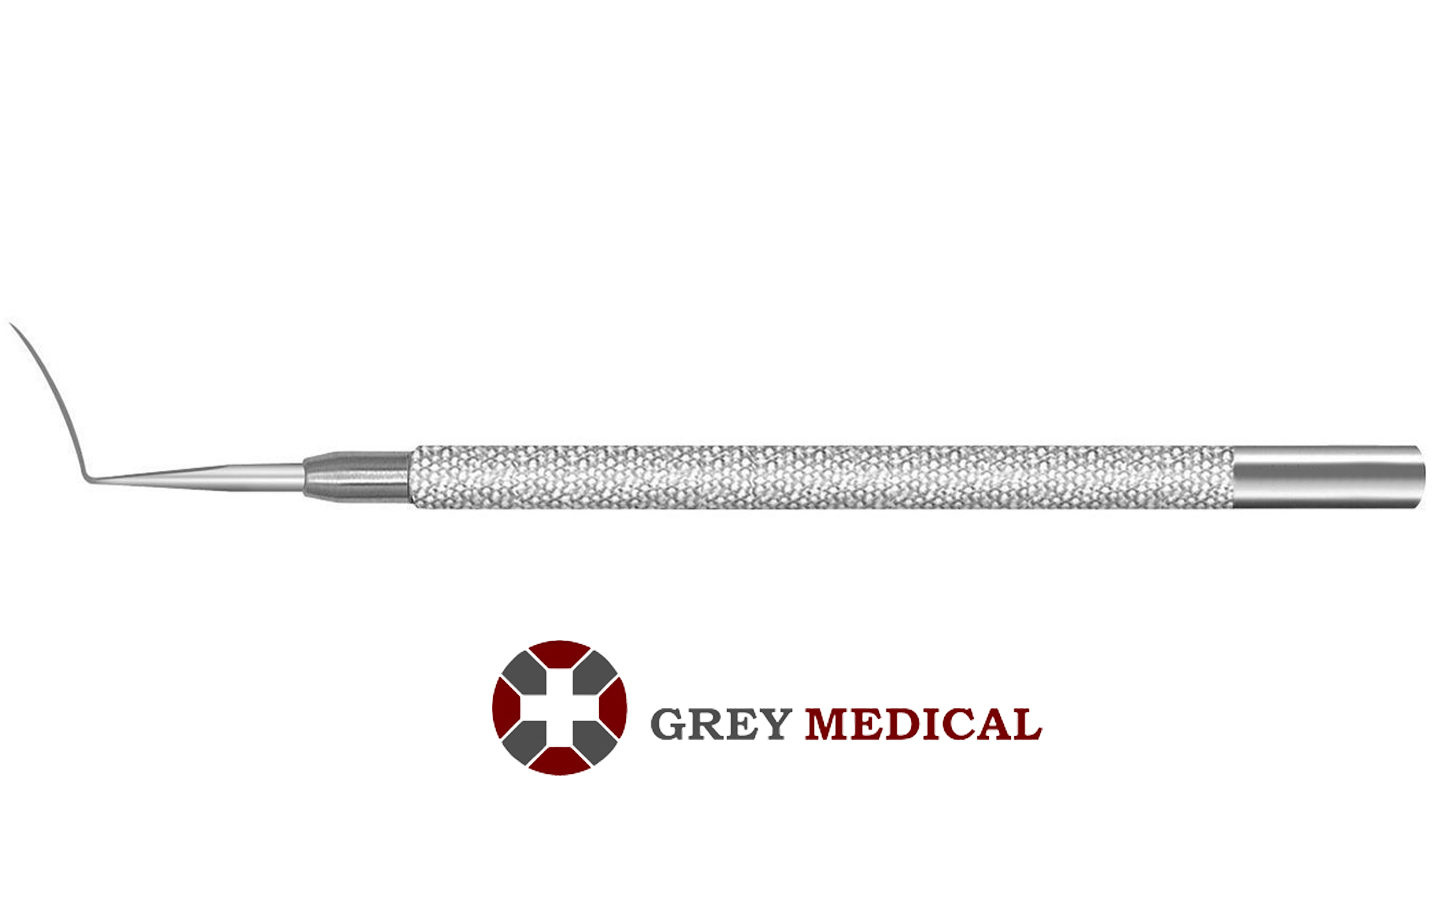 DLEK Corneal Dissector Vaulted